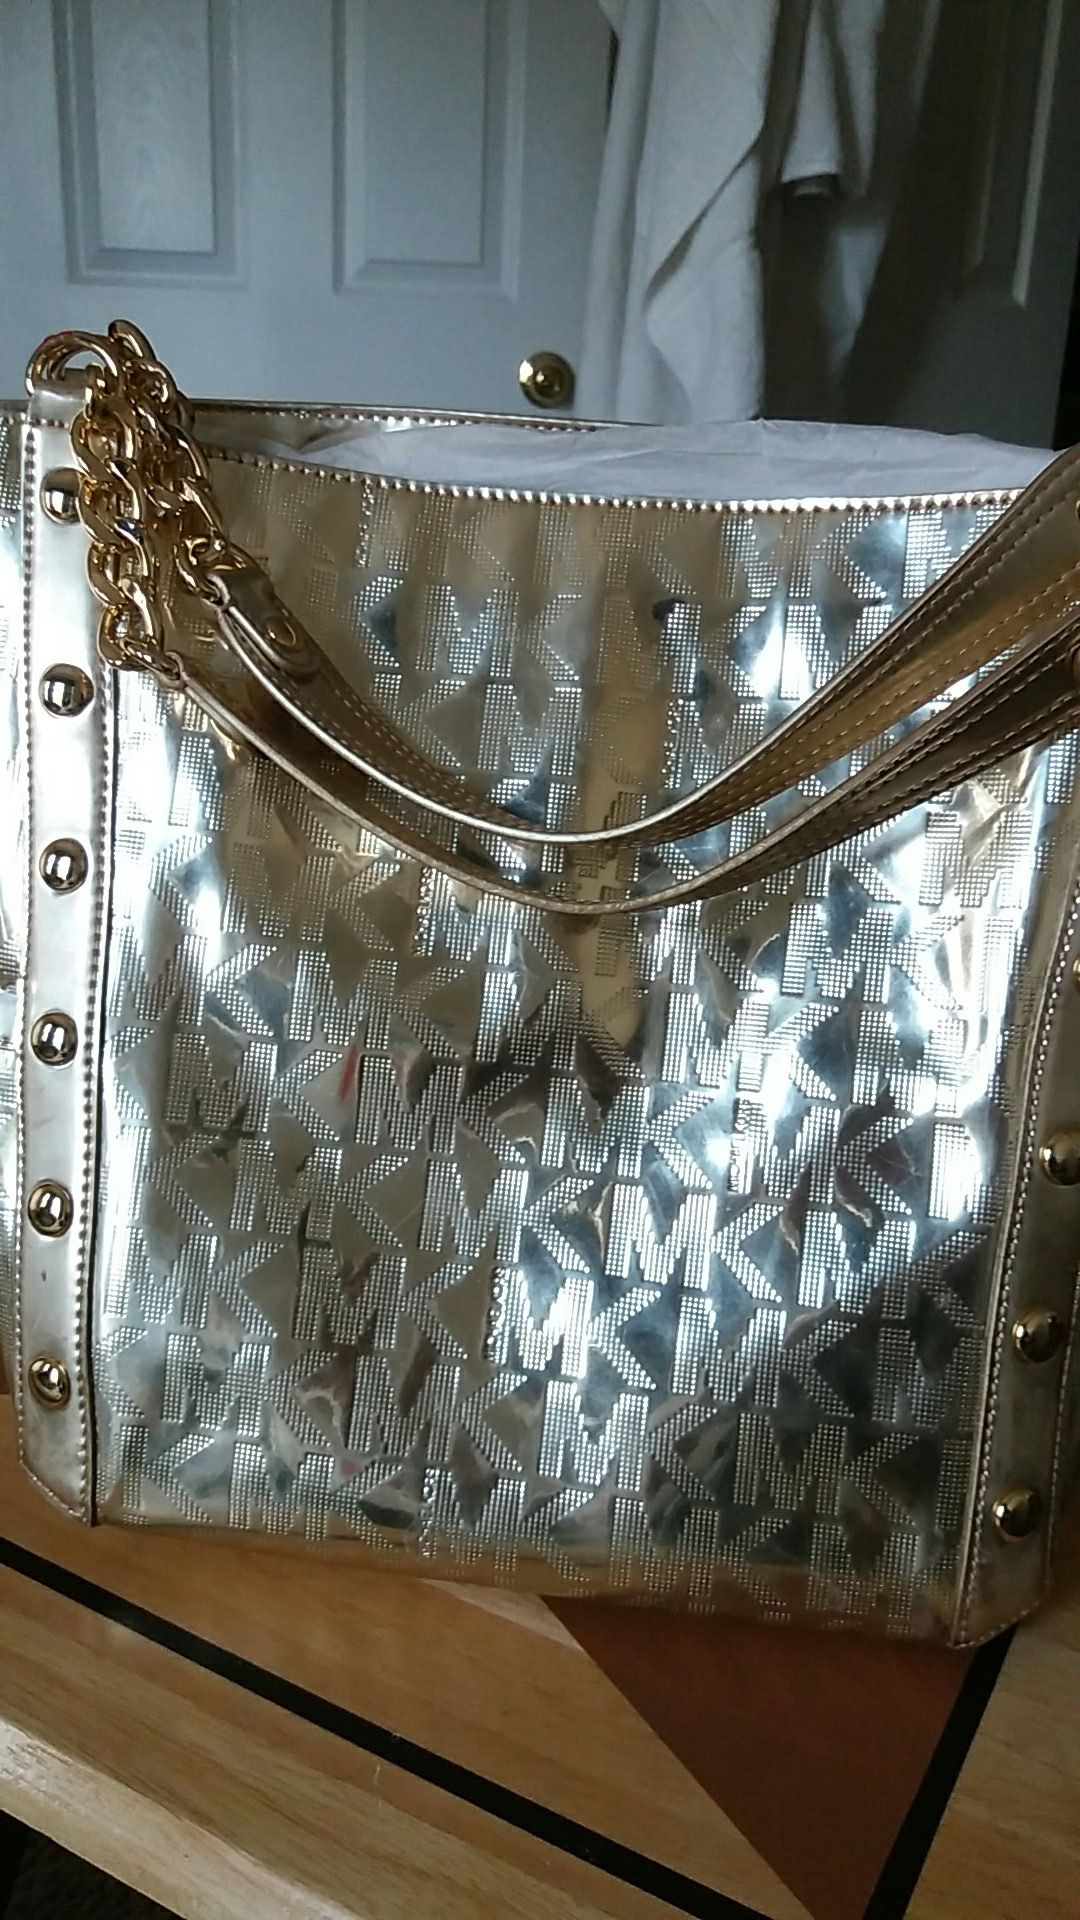 Michael kors plle gold lG shldr tote. Cash or trade looking for phone